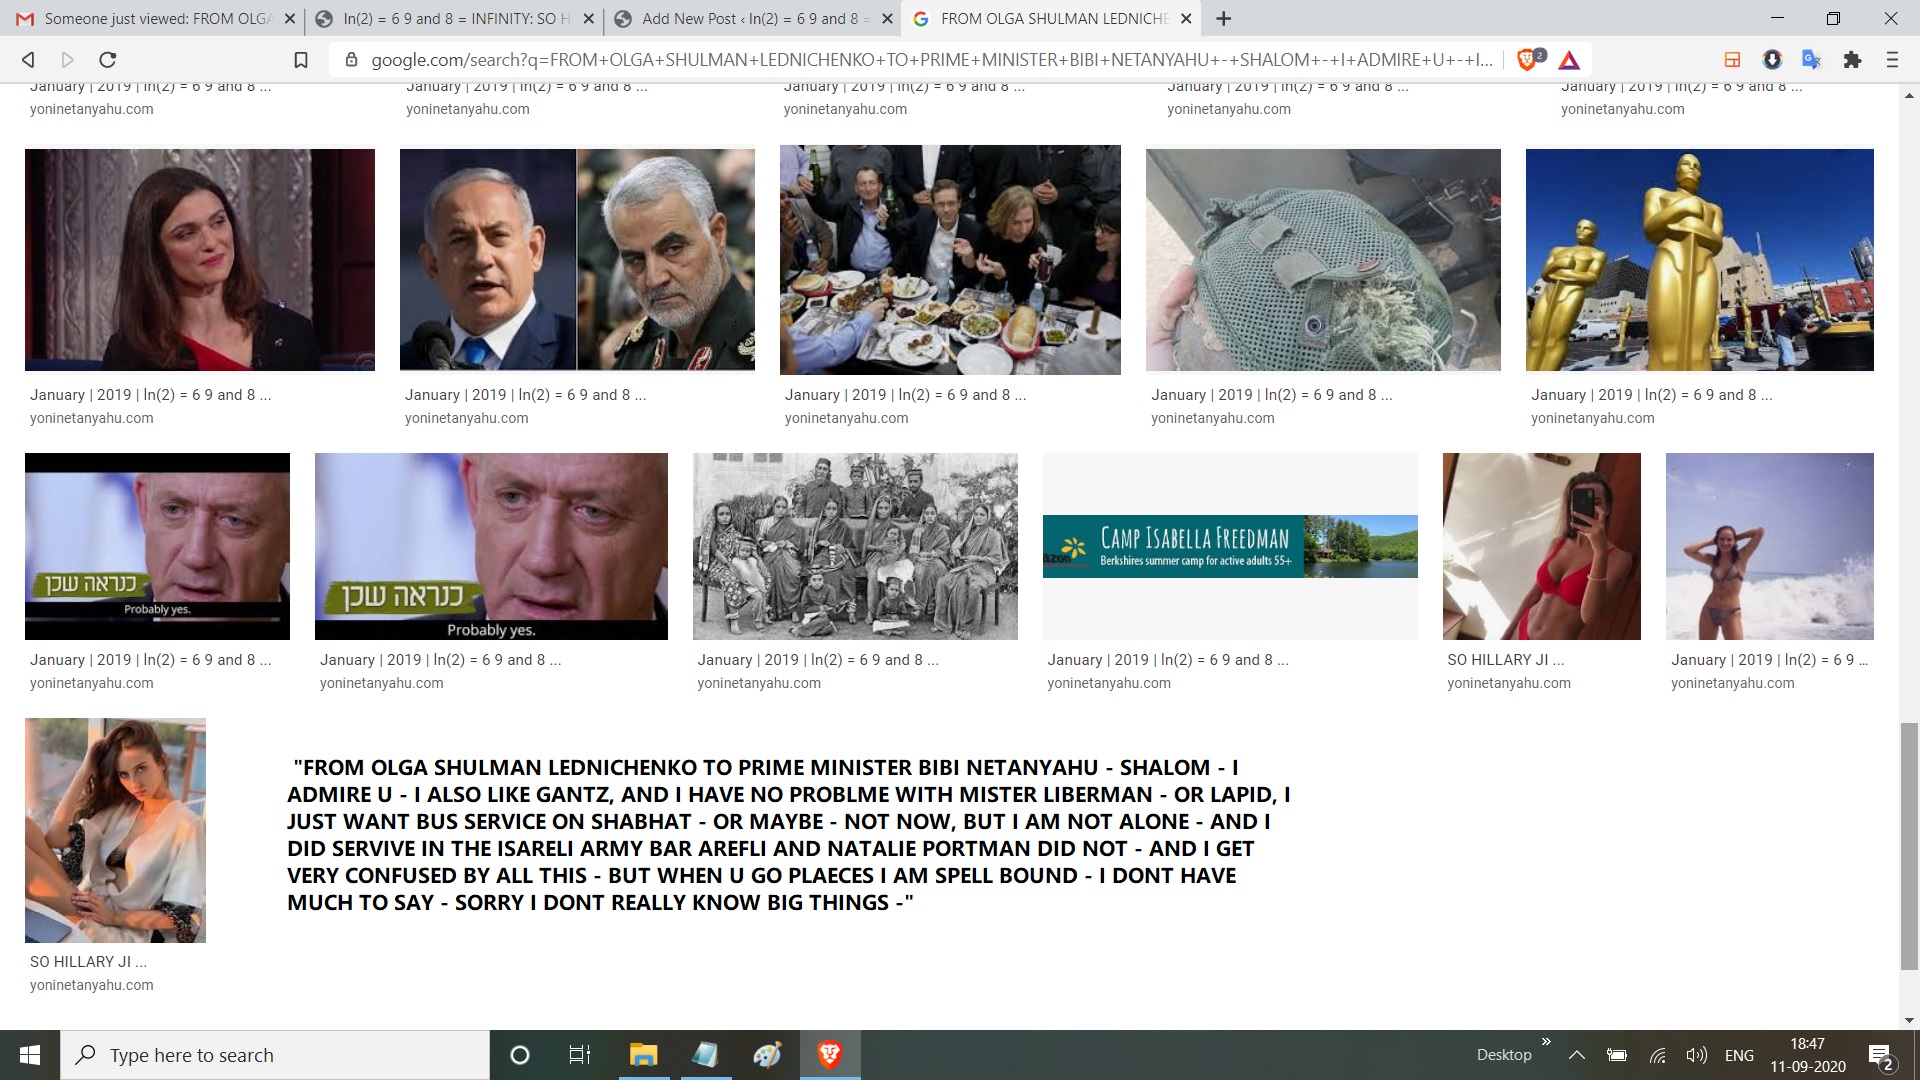  "FROM OLGA SHULMAN LEDNICHENKO TO PRIME MINISTER BIBI NETANYAHU - SHALOM - I ADMIRE U - I ALSO LIKE GANTZ, AND I HAVE NO PROBLME WITH MISTER LIBERMAN - OR LAPID, I JUST WANT BUS SERVICE ON SHABHAT - OR MAYBE - NOT NOW, BUT I AM NOT ALONE - AND I DID SERVIVE IN THE ISARELI ARMY BAR AREFLI AND NATALIE PORTMAN DID NOT - AND I GET VERY CONFUSED BY ALL THIS - BUT WHEN U GO PLAECES I AM SPELL BOUND - I DONT HAVE MUCH TO SAY - SORRY I DONT REALLY KNOW BIG THINGS -"